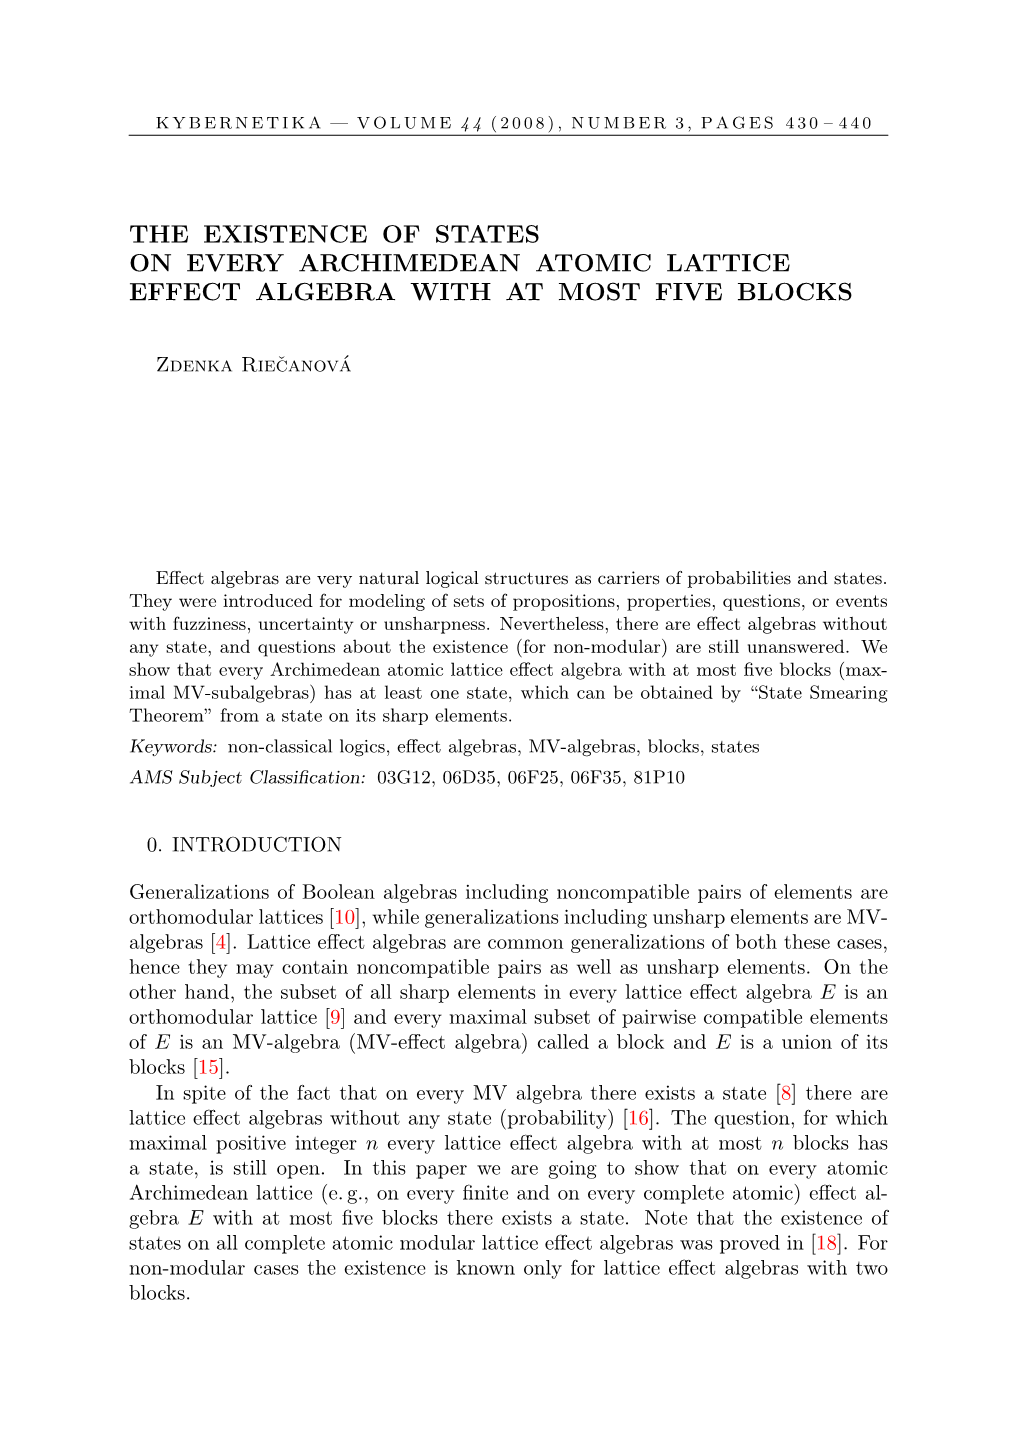 The Existence of States on Every Archimedean Atomic Lattice Effect Algebra with at Most Five Blocks